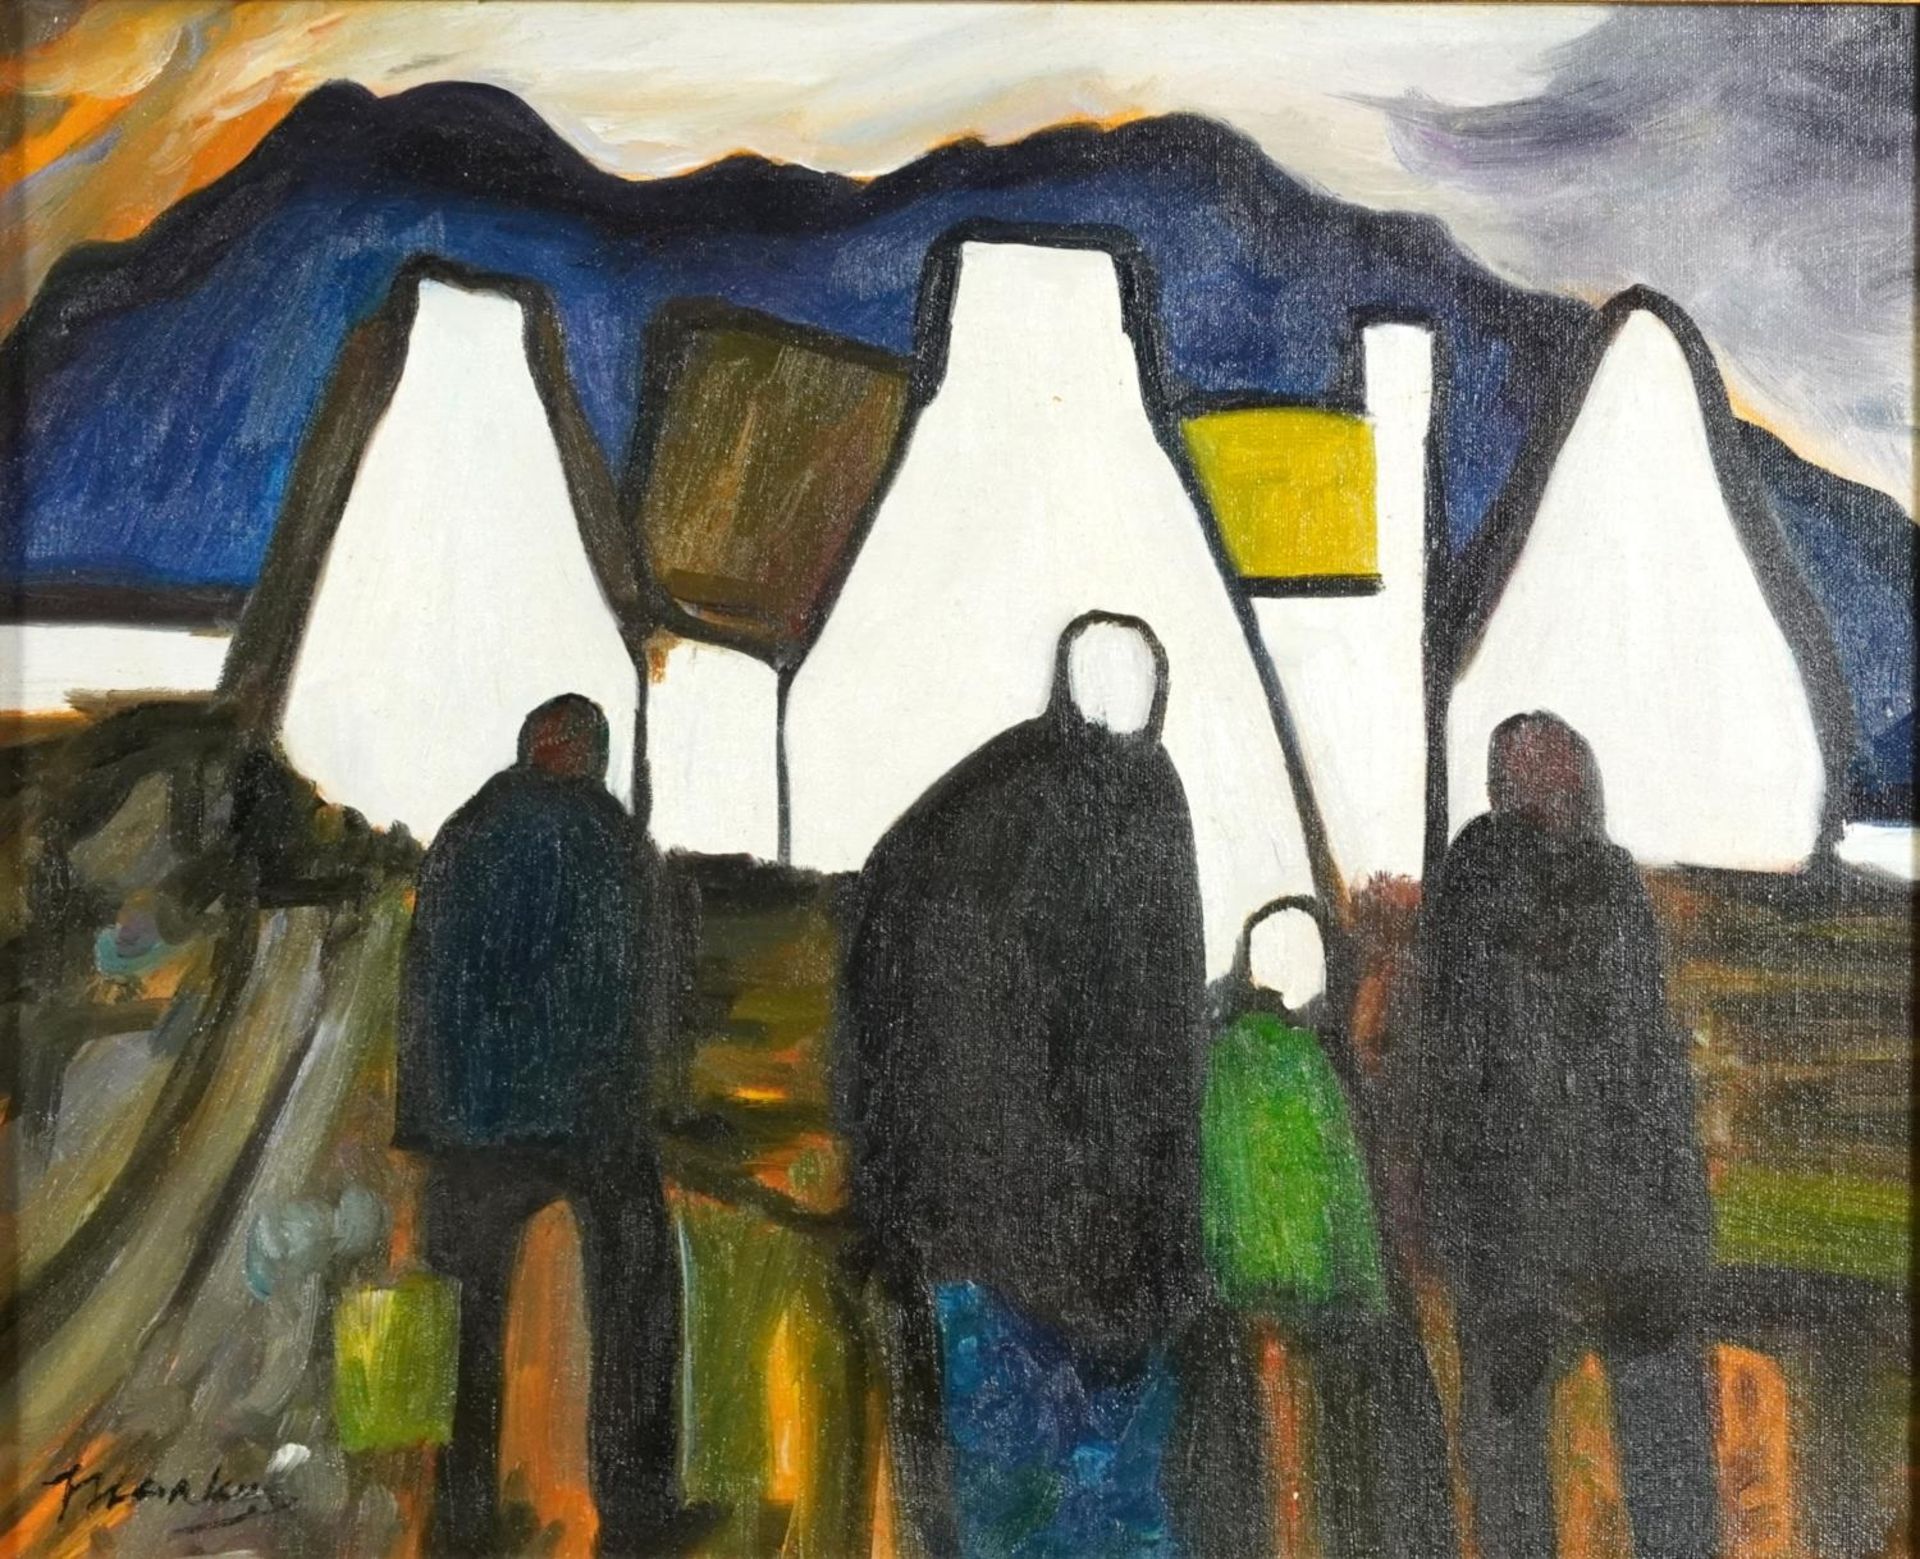 Manner of Markey Robinson - Figures and cottages before a mountainous landscape, Irish school oil on